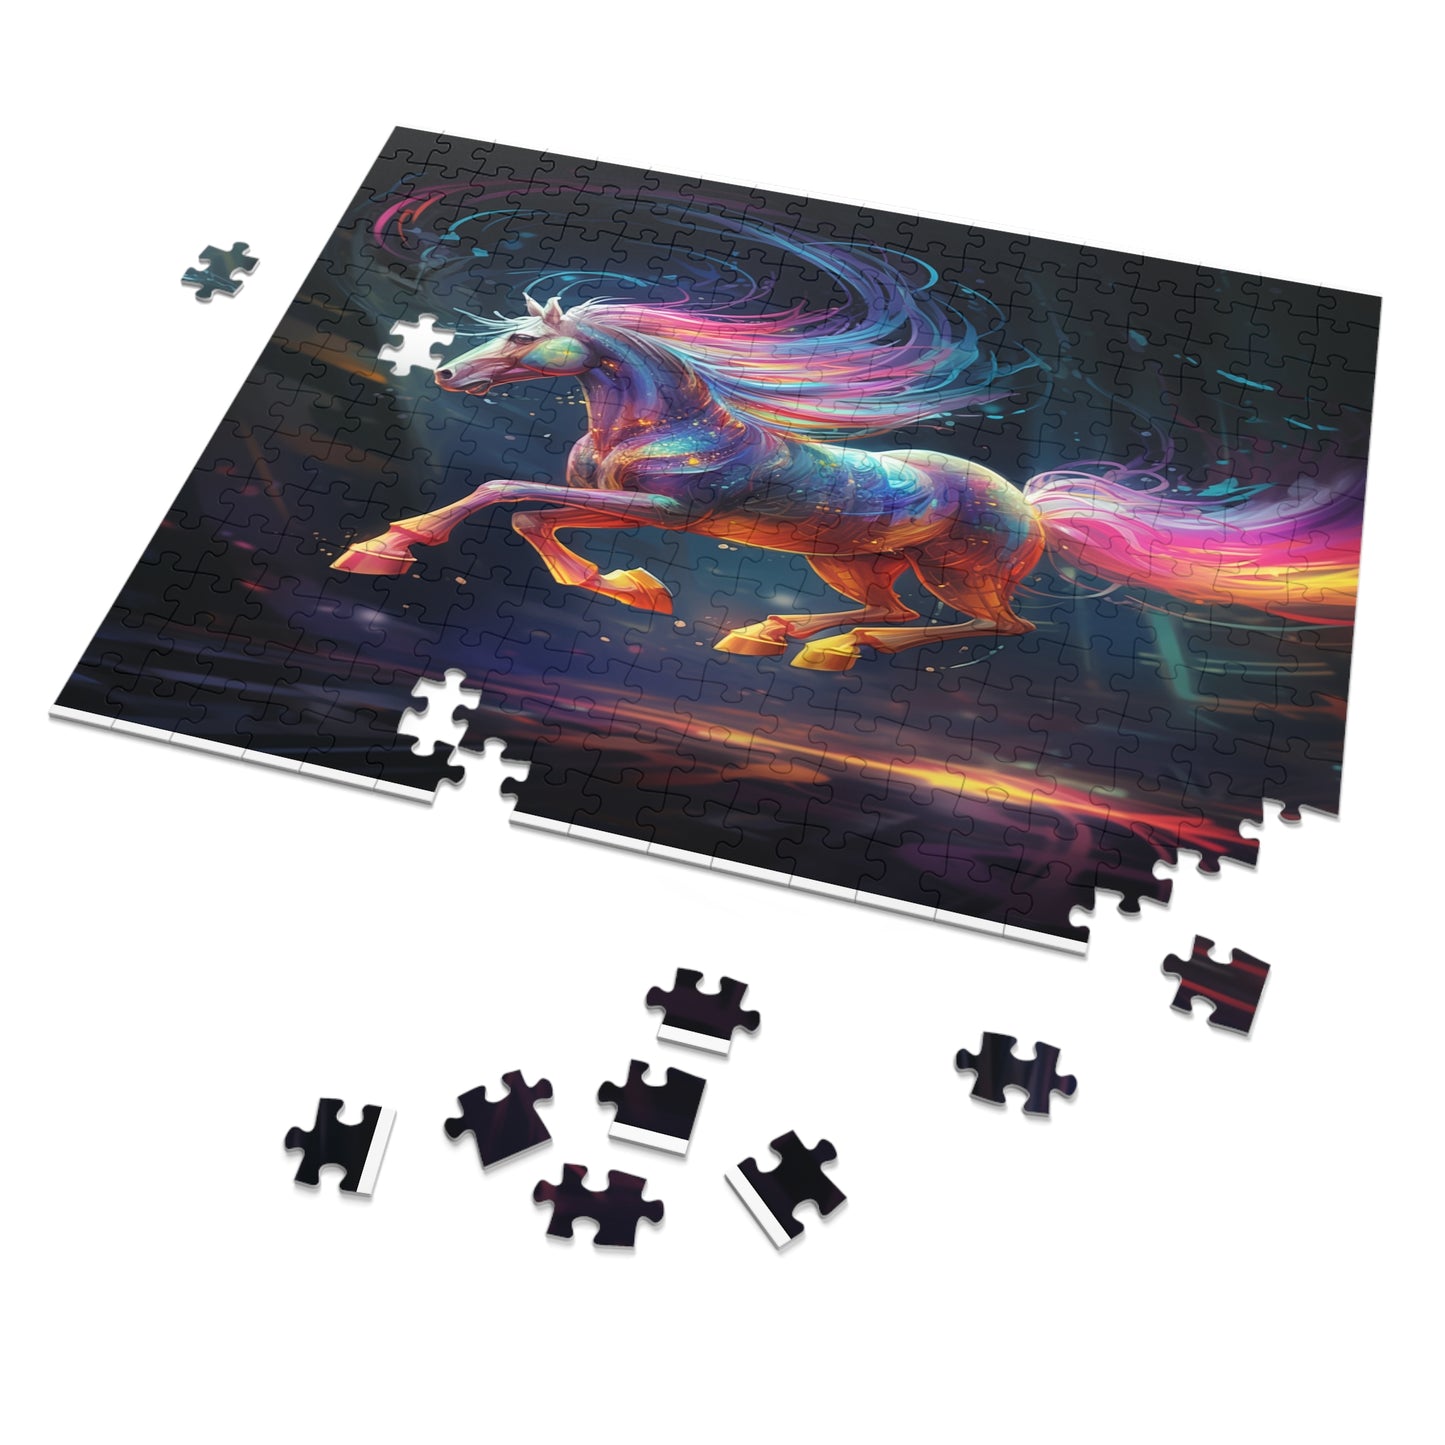 Build a World of Enchantment: "The Magic Pony" Jigsaw Puzzle (500,1000-Piece) Pink Highlights